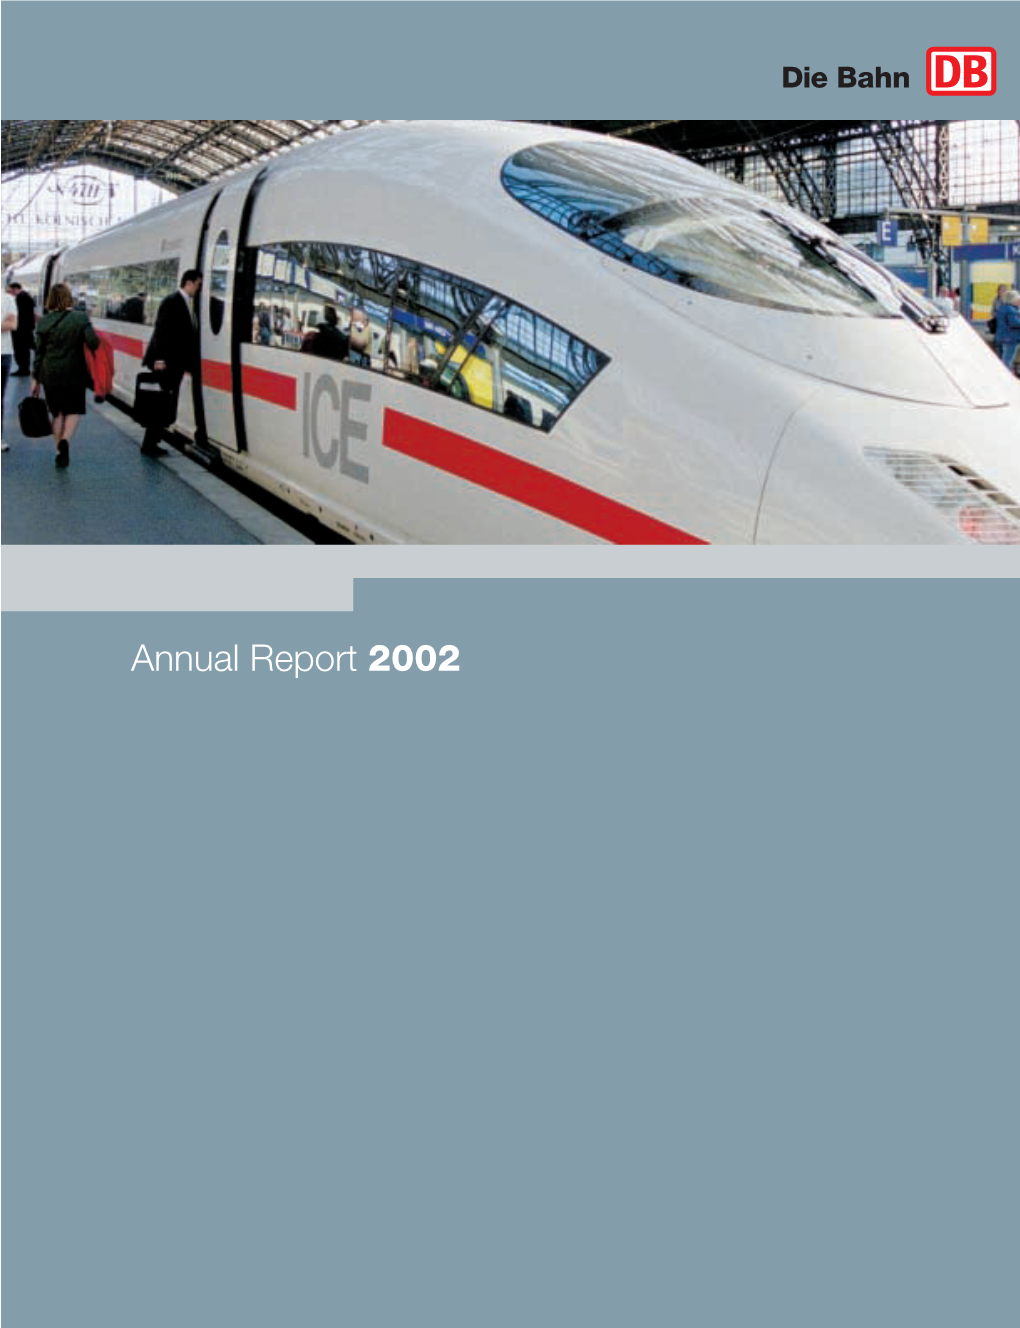 Annual Report 2002 Performance Measures